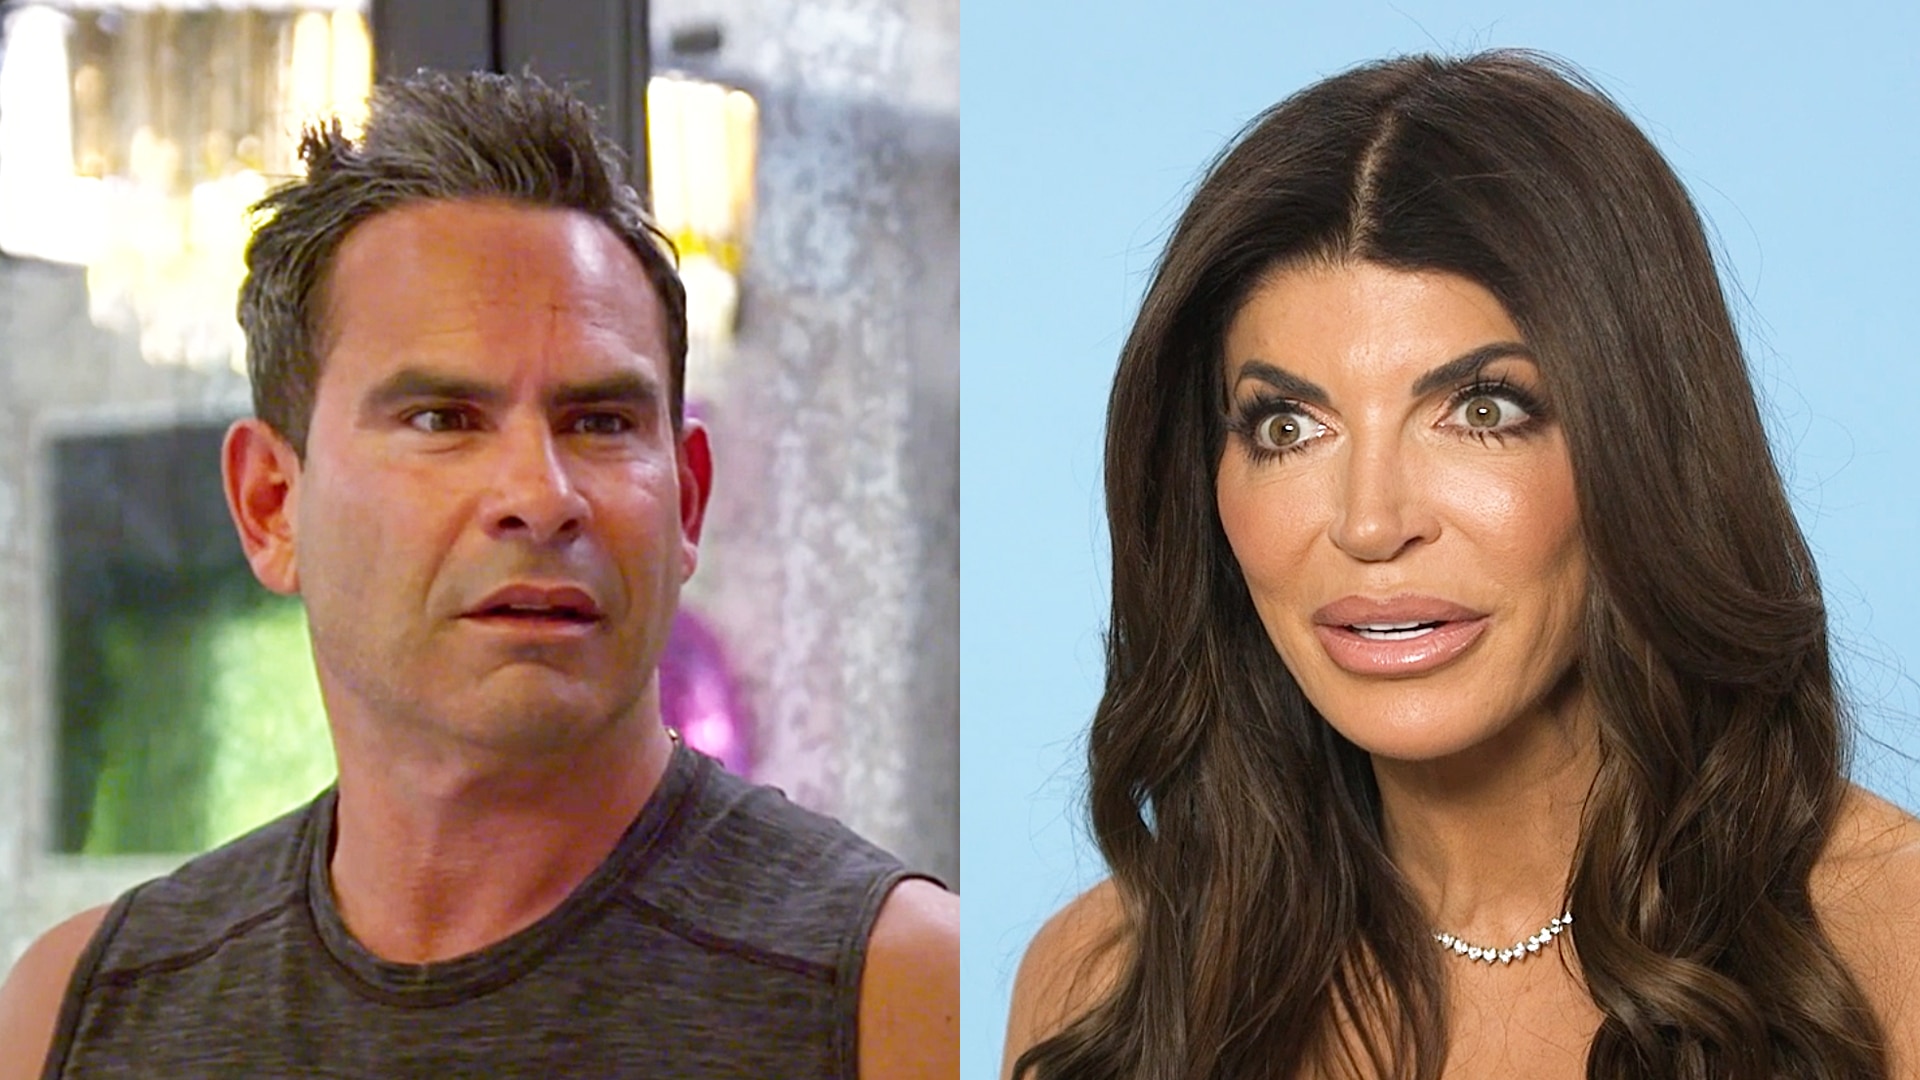 Teresa Giudice: "I Was Only Doing What Louie Told Me to Do"